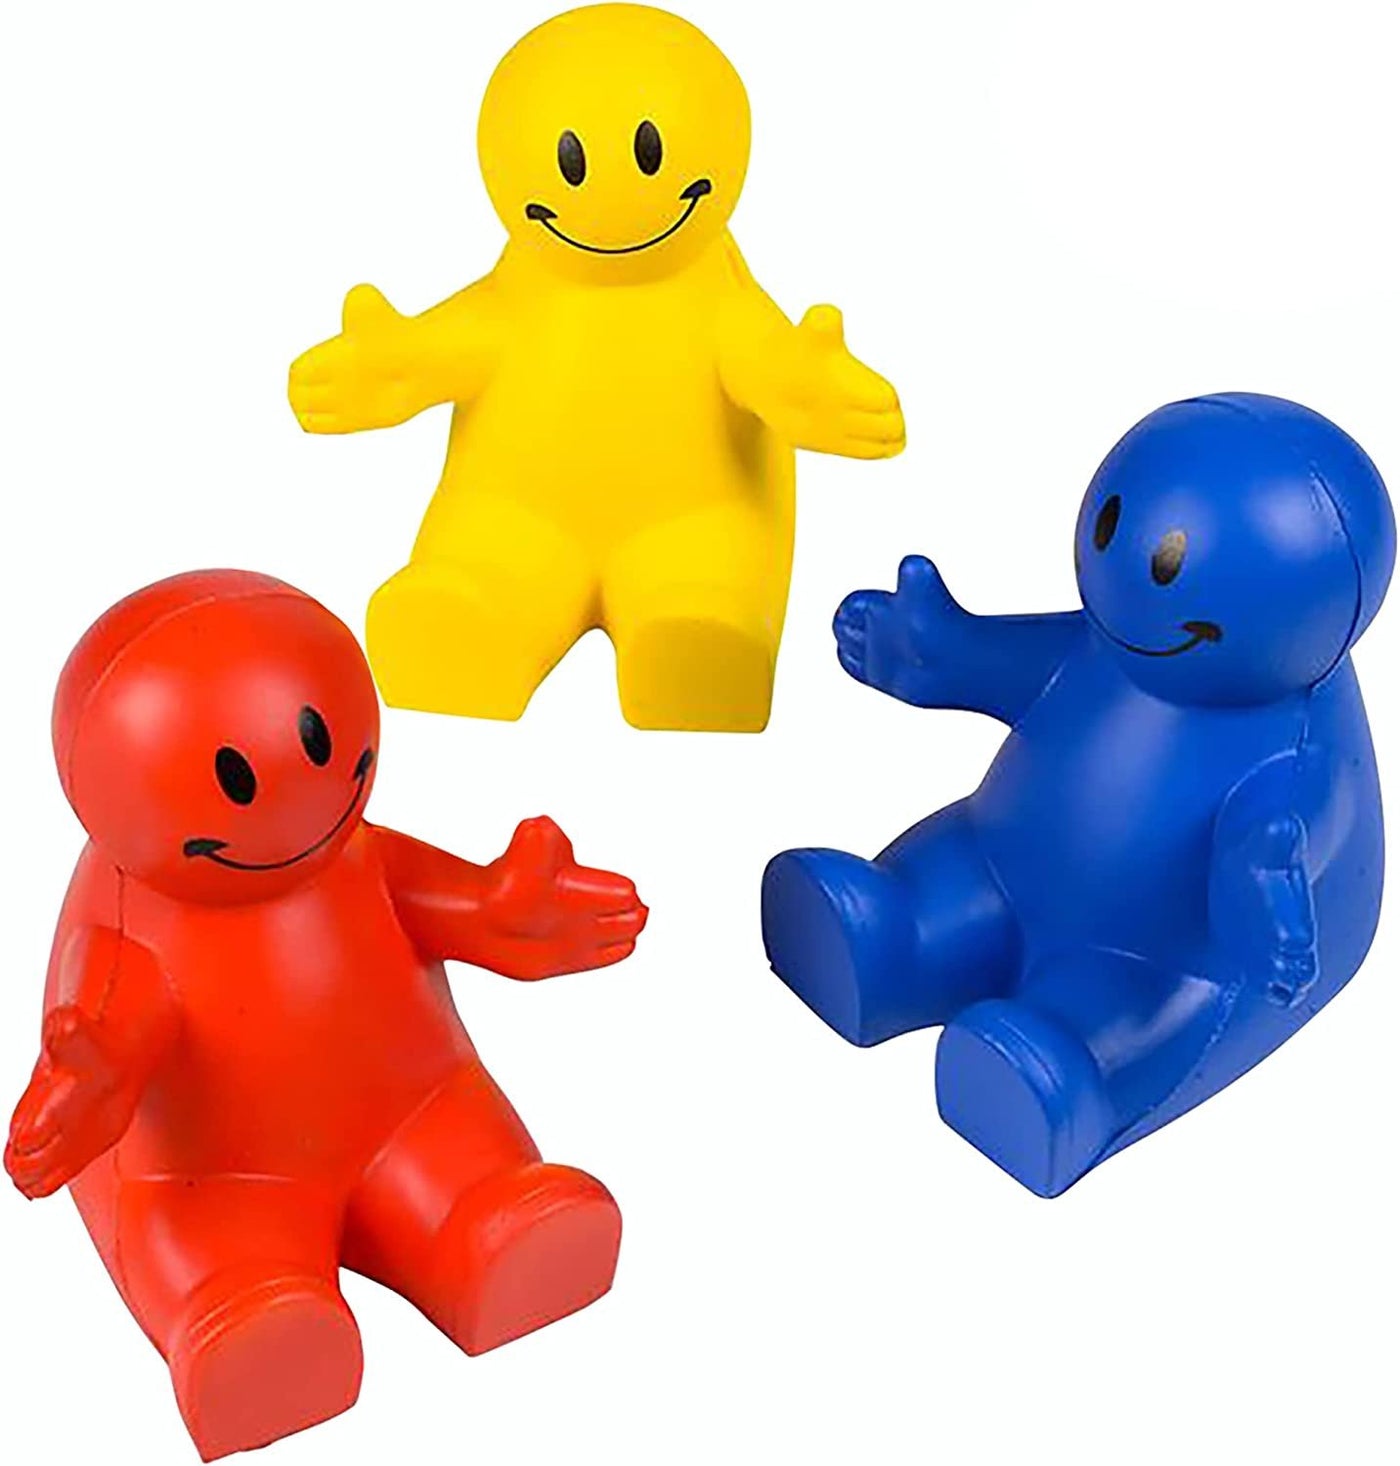 4" Squeezable Smile Phone Holder, 3 Pack, 2-in-1 Smartphone Stand, Squeeze Stress Relief Fidget Toy for Kids & Adults, Desk Decoration, Party Favor, Office Gift, Red-Blue-Yellow